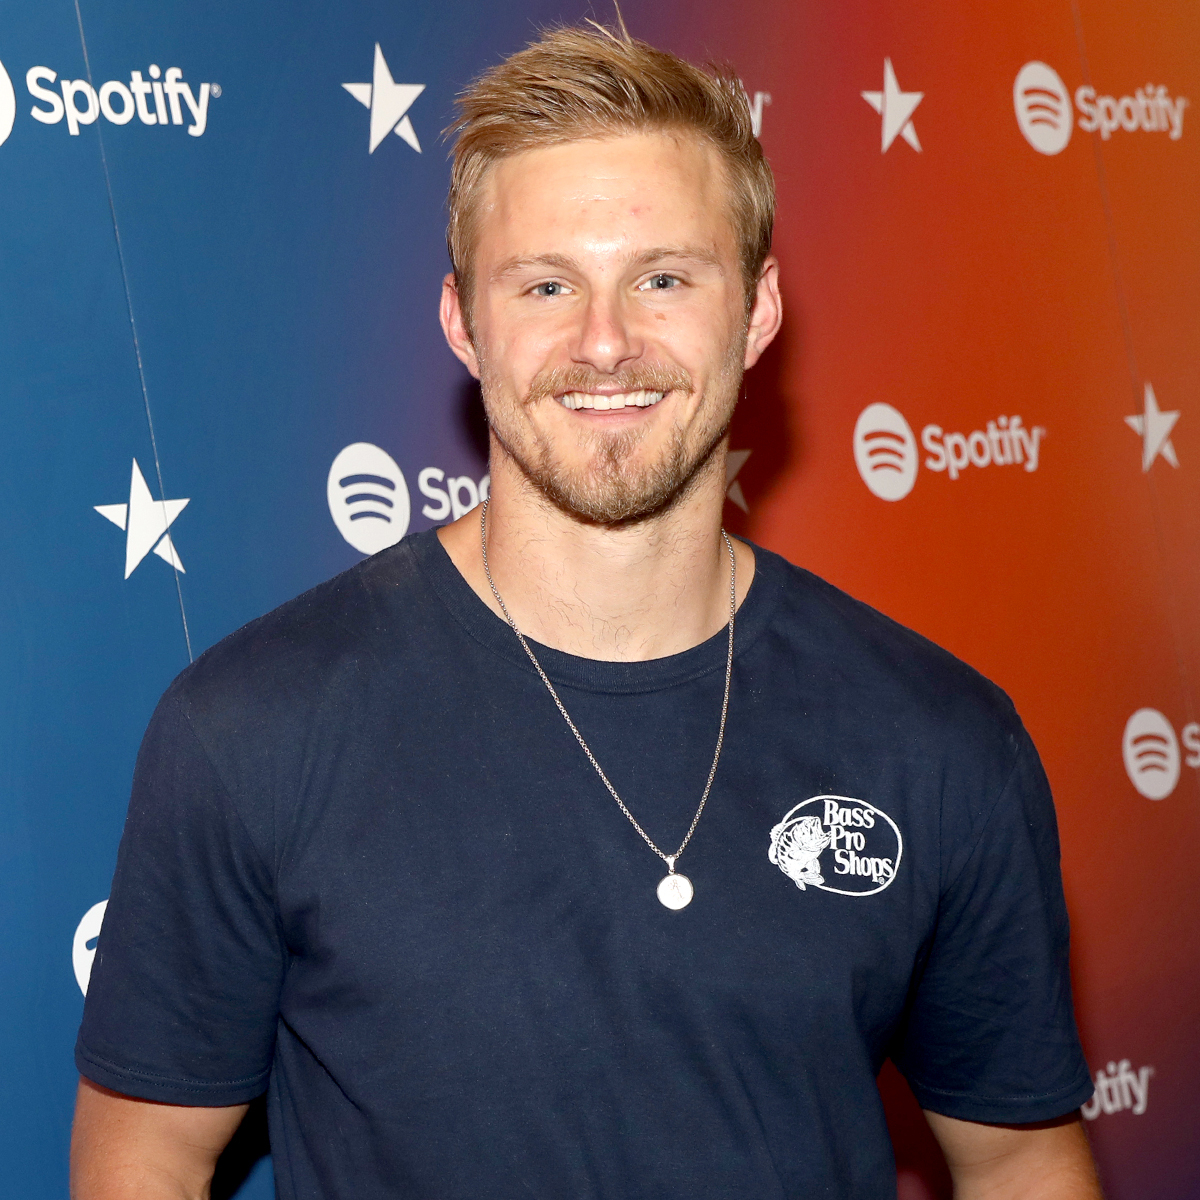 You’ll Want to Listen to Alexander Ludwig’s “Dirty Little Secret”